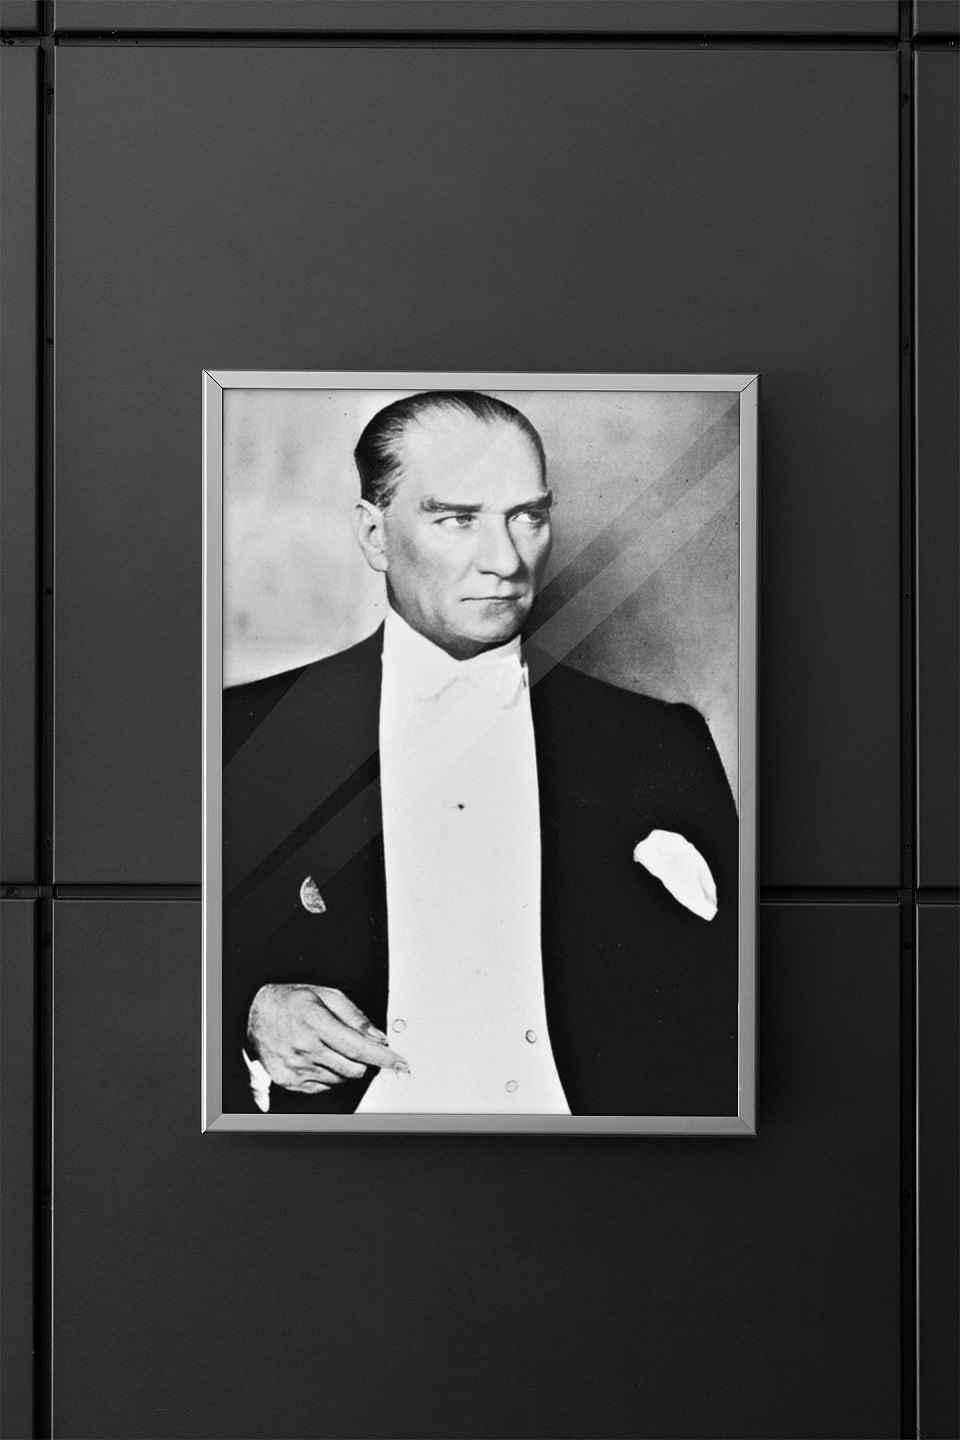 Poster case containing a Mustafa Kemal Ataturk print mounted on a modern wall.